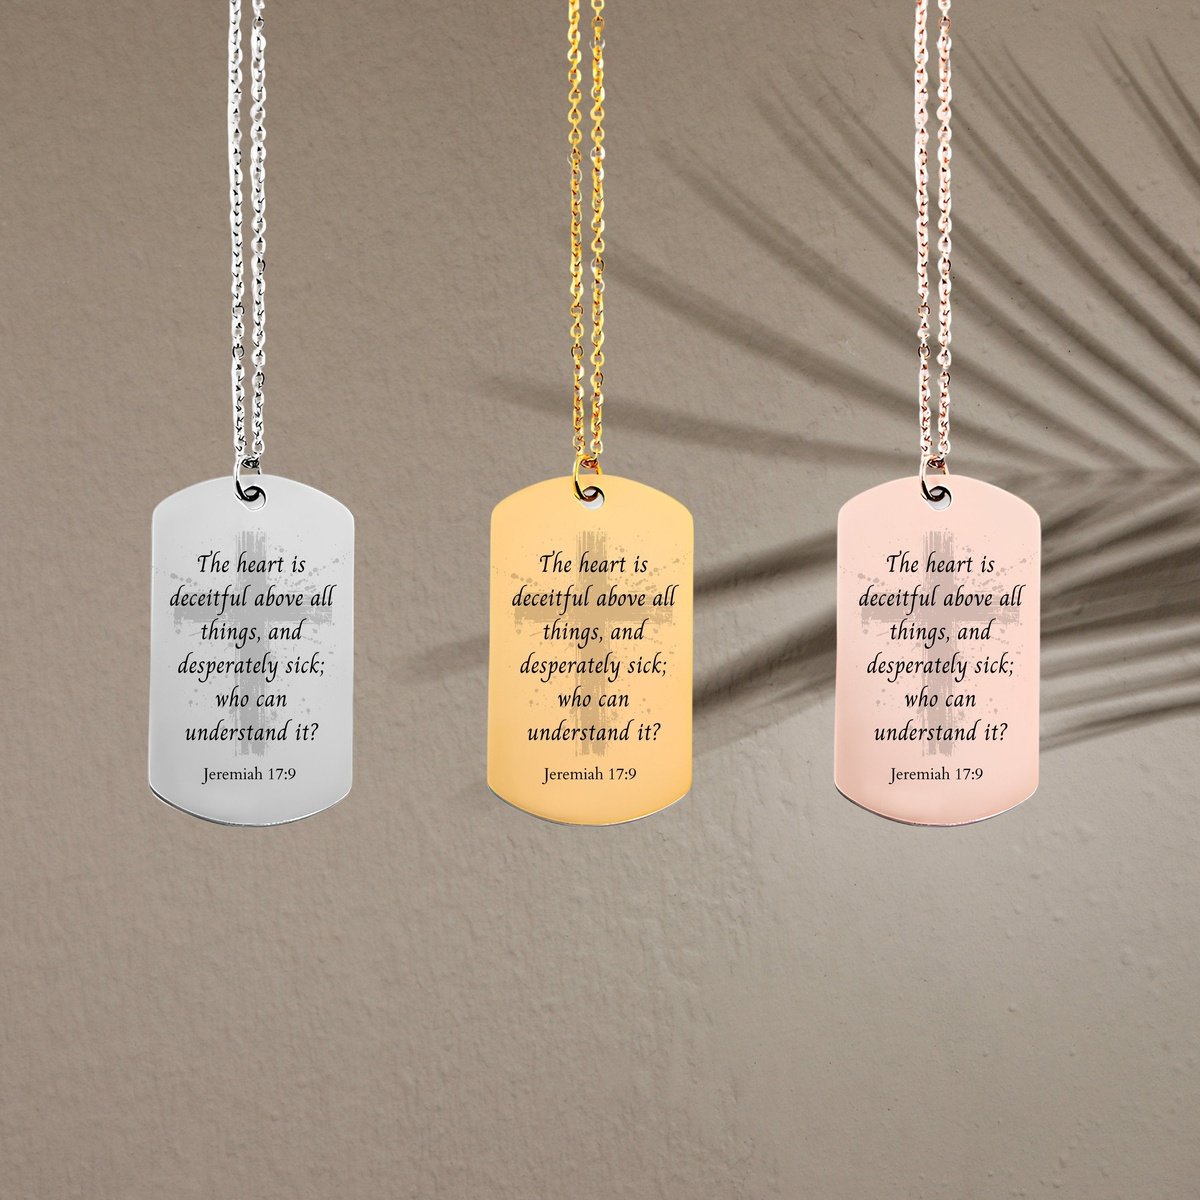 Jeremiah 17 9 quote necklace, gold bible verse, 14k gold cross charm necklace, confirmation gift, gold bar tag necklace, religious scripture